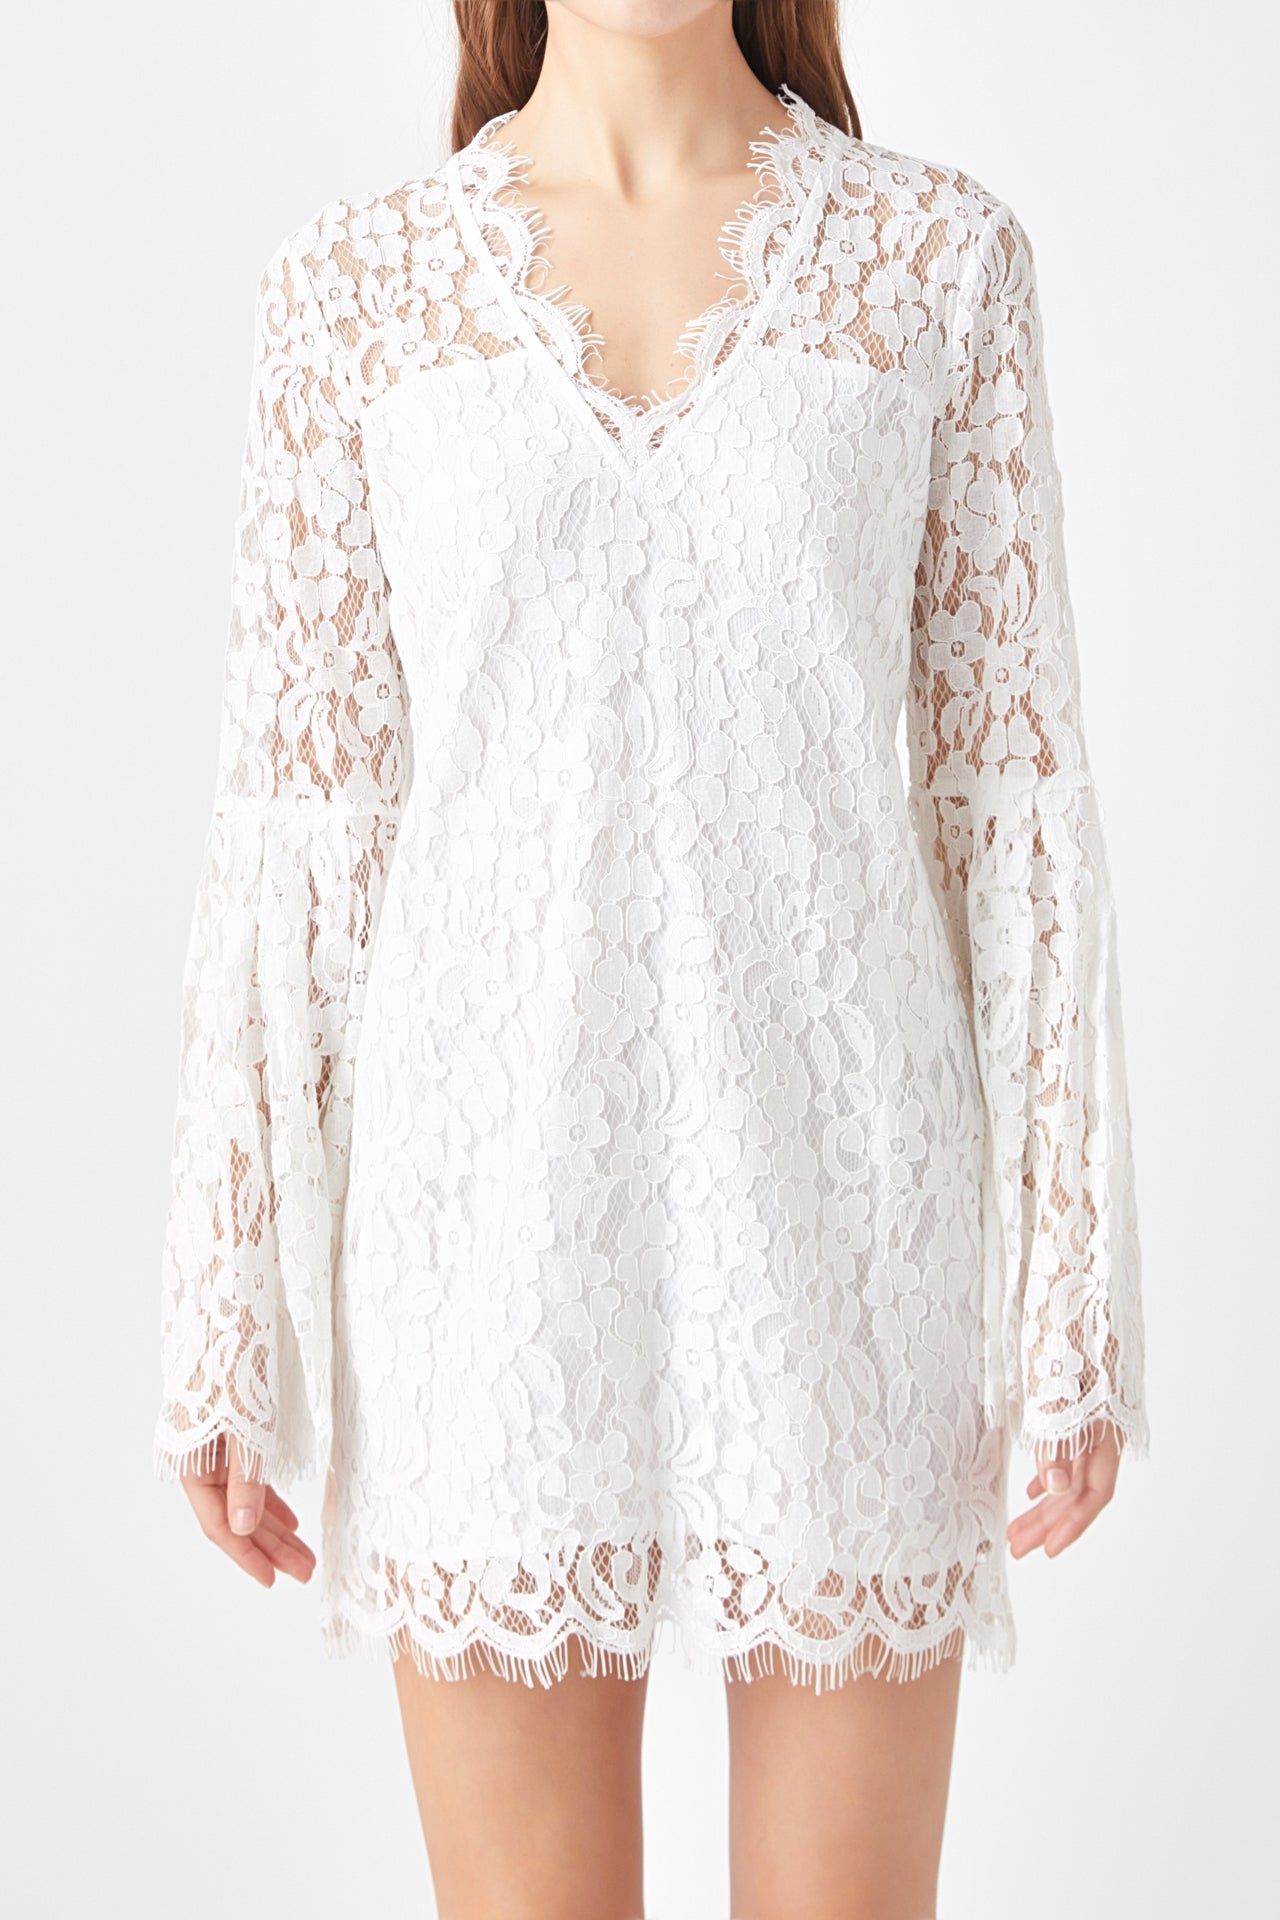 ENDLESS ROSE - Bell Sleeve V-Neck Lace Dress - DRESSES available at Objectrare